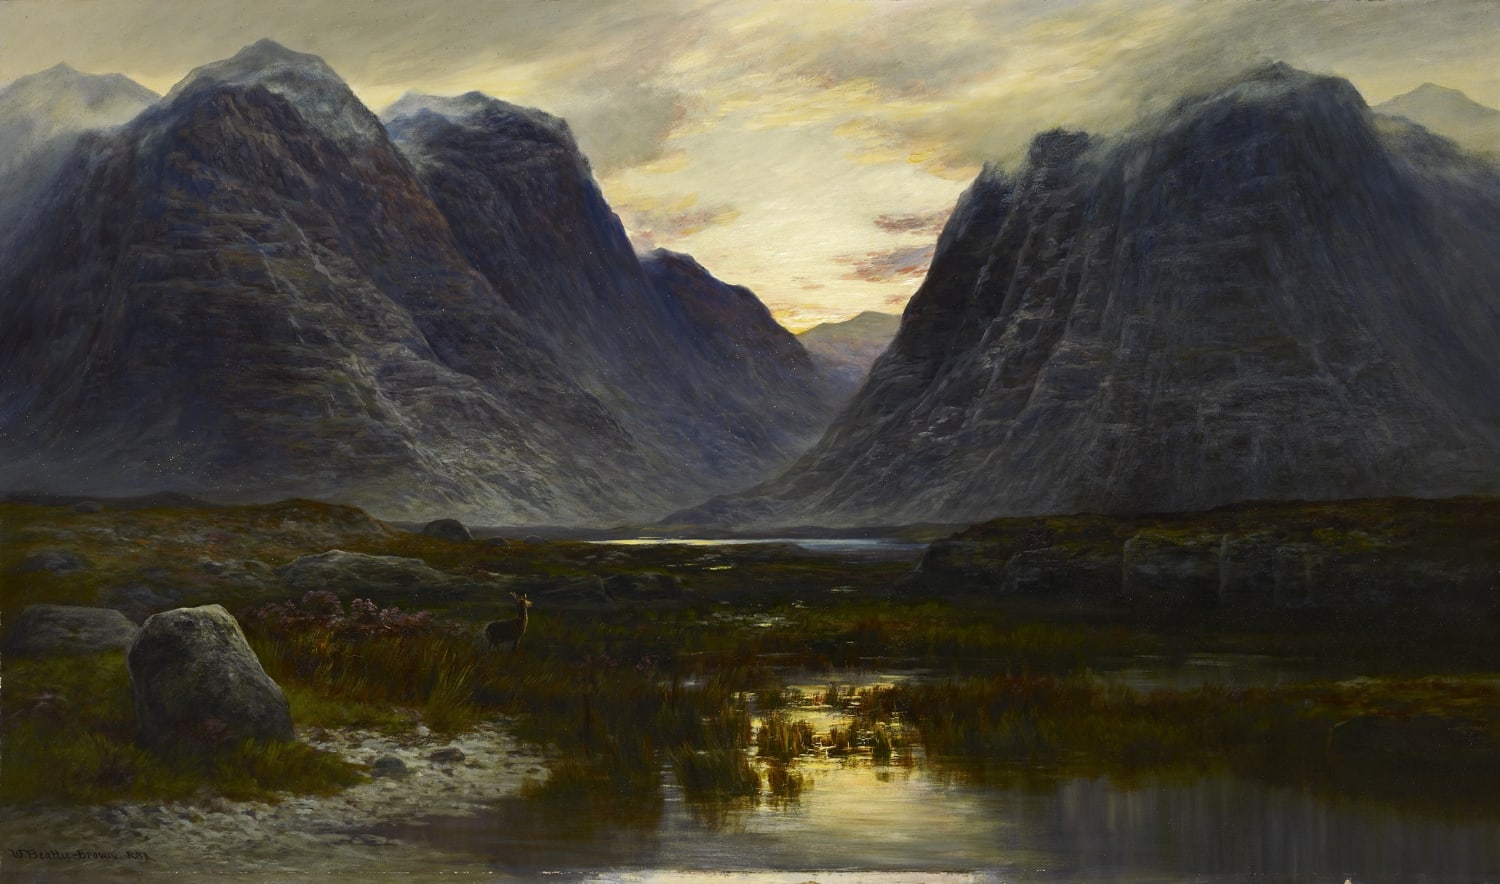 William Beattie Brown RSA (1831-1909), Coire-na-Faireamh in Applecross Deer Forest Ross-shire  Oil on cavnvas, around 1883-84, 67.8 x 114.6cm  RSA Diploma Collection (Deposited, 1884) 2000.011